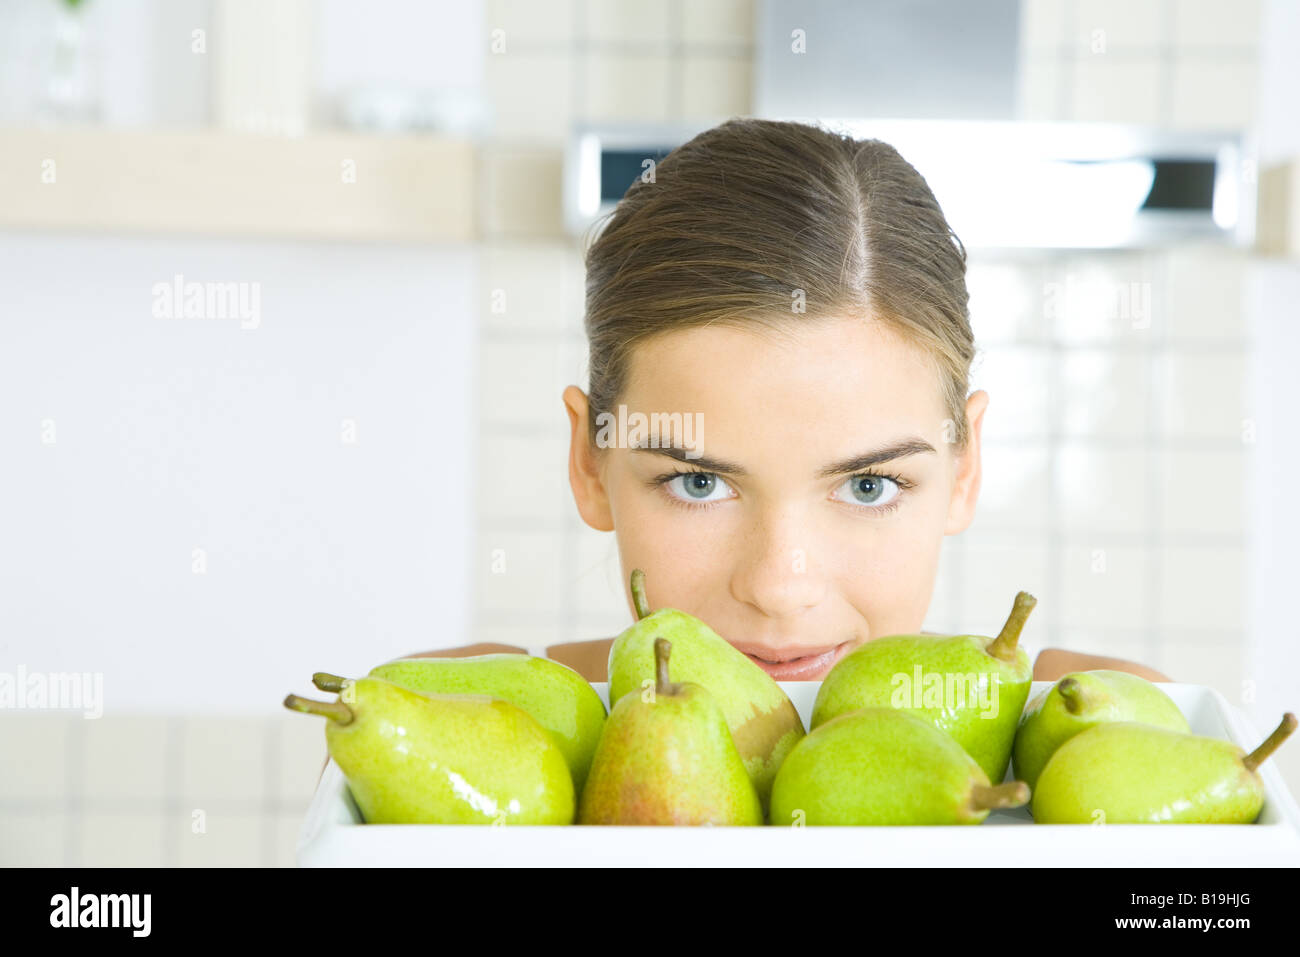 Young woman looking over tray of pears Stock Photo